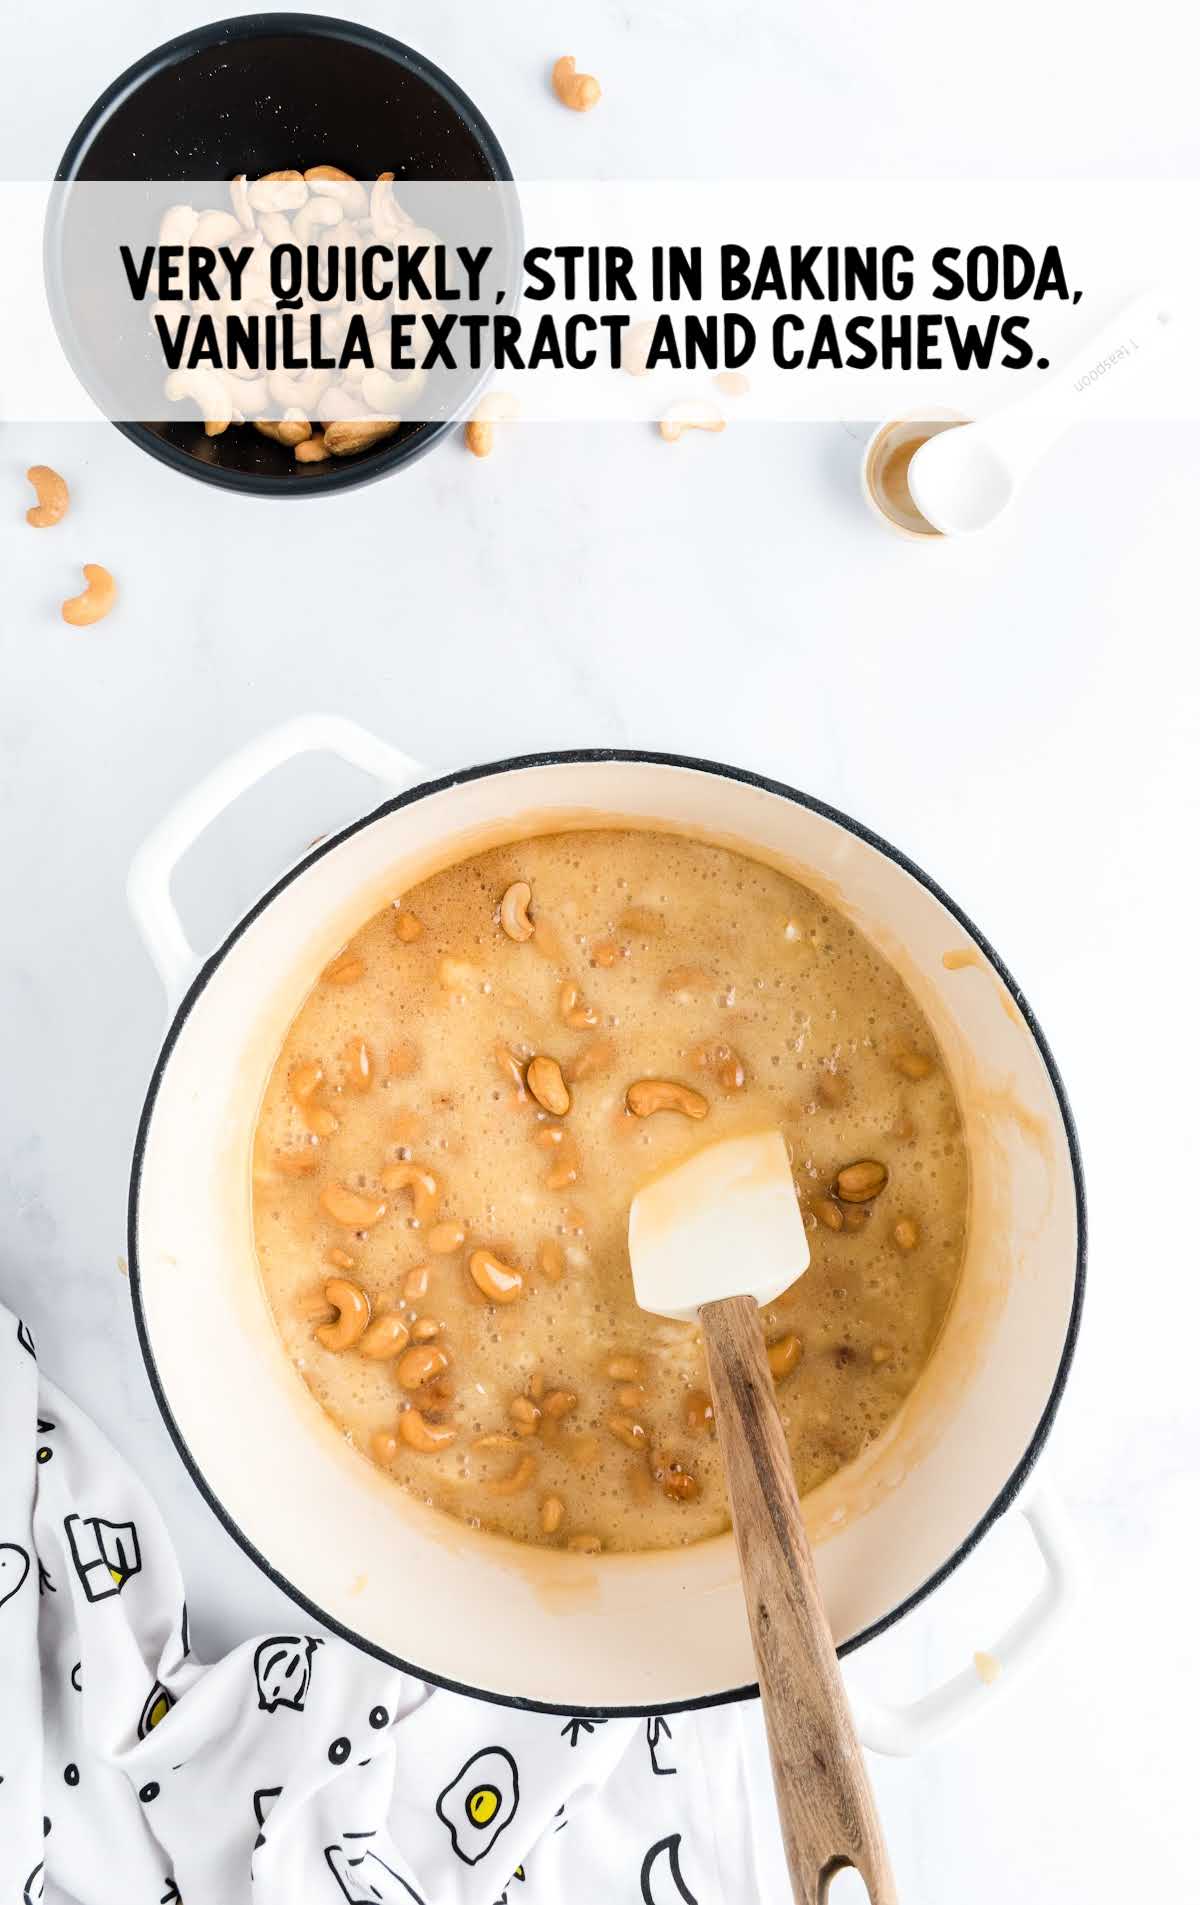 baking soda, vanilla extract and cashews stir in a bowl